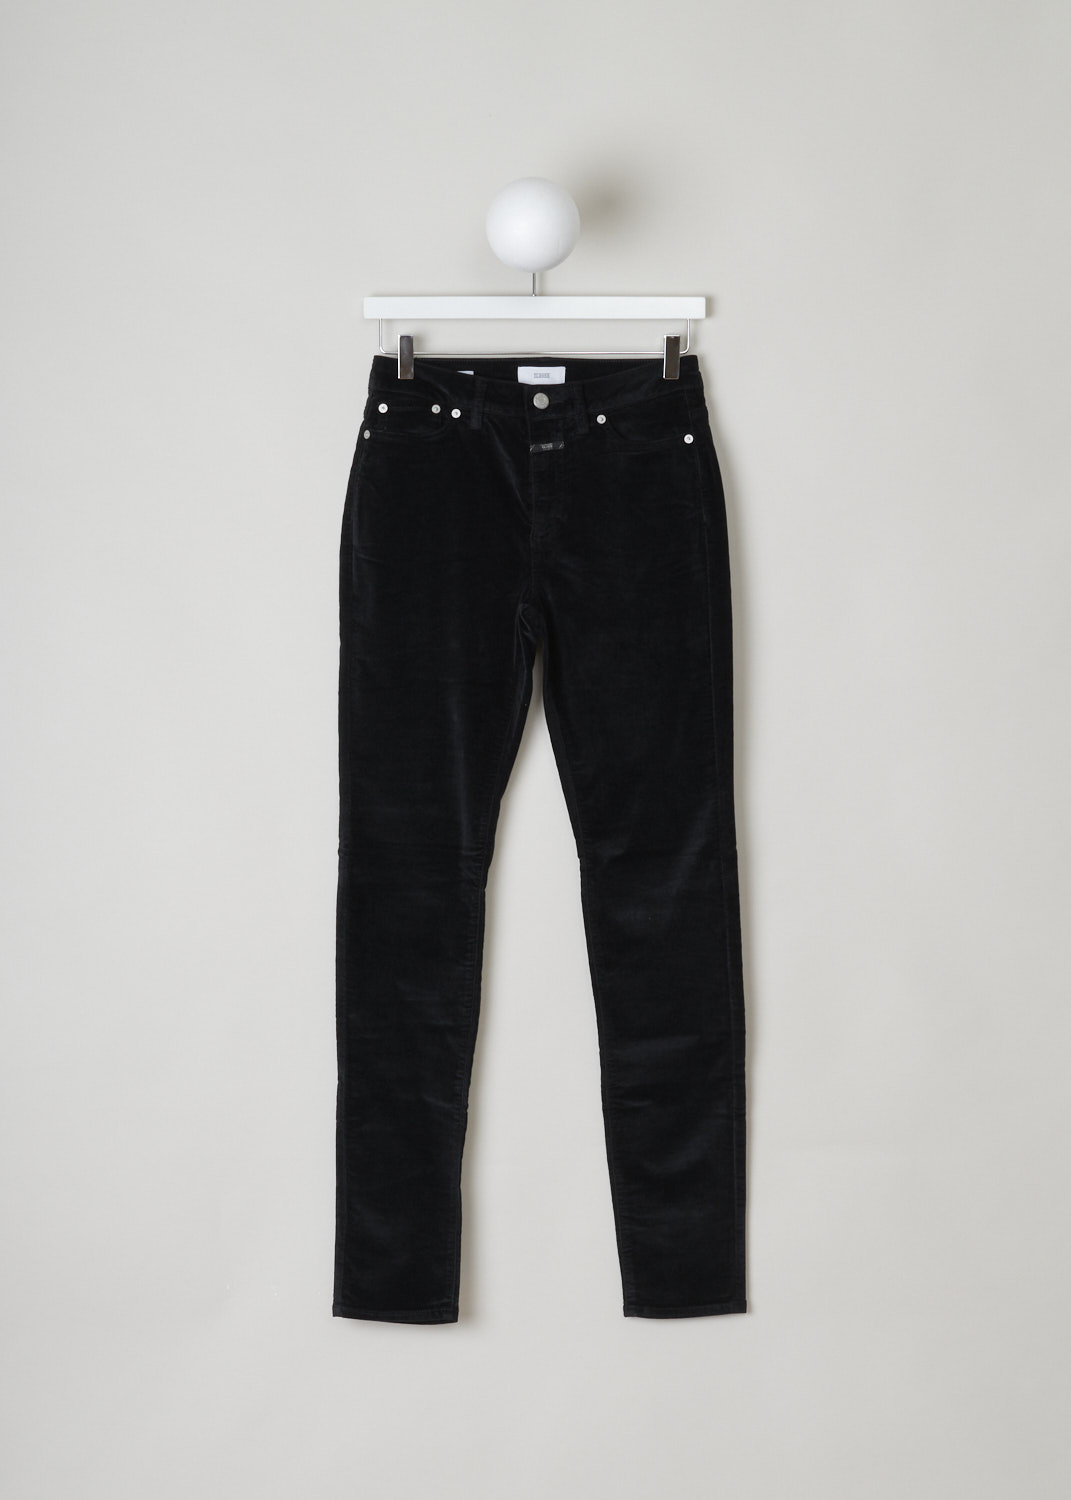 Closed, Black velvet lizzy jeans, lizzy_C91099_38C_30_100, black, front, Black velvet pants comes in a 5-pocket model, with a high-waist and tapered fit throughout the legs. The cotton blend used on this model is know for its high elasticity and comfort.